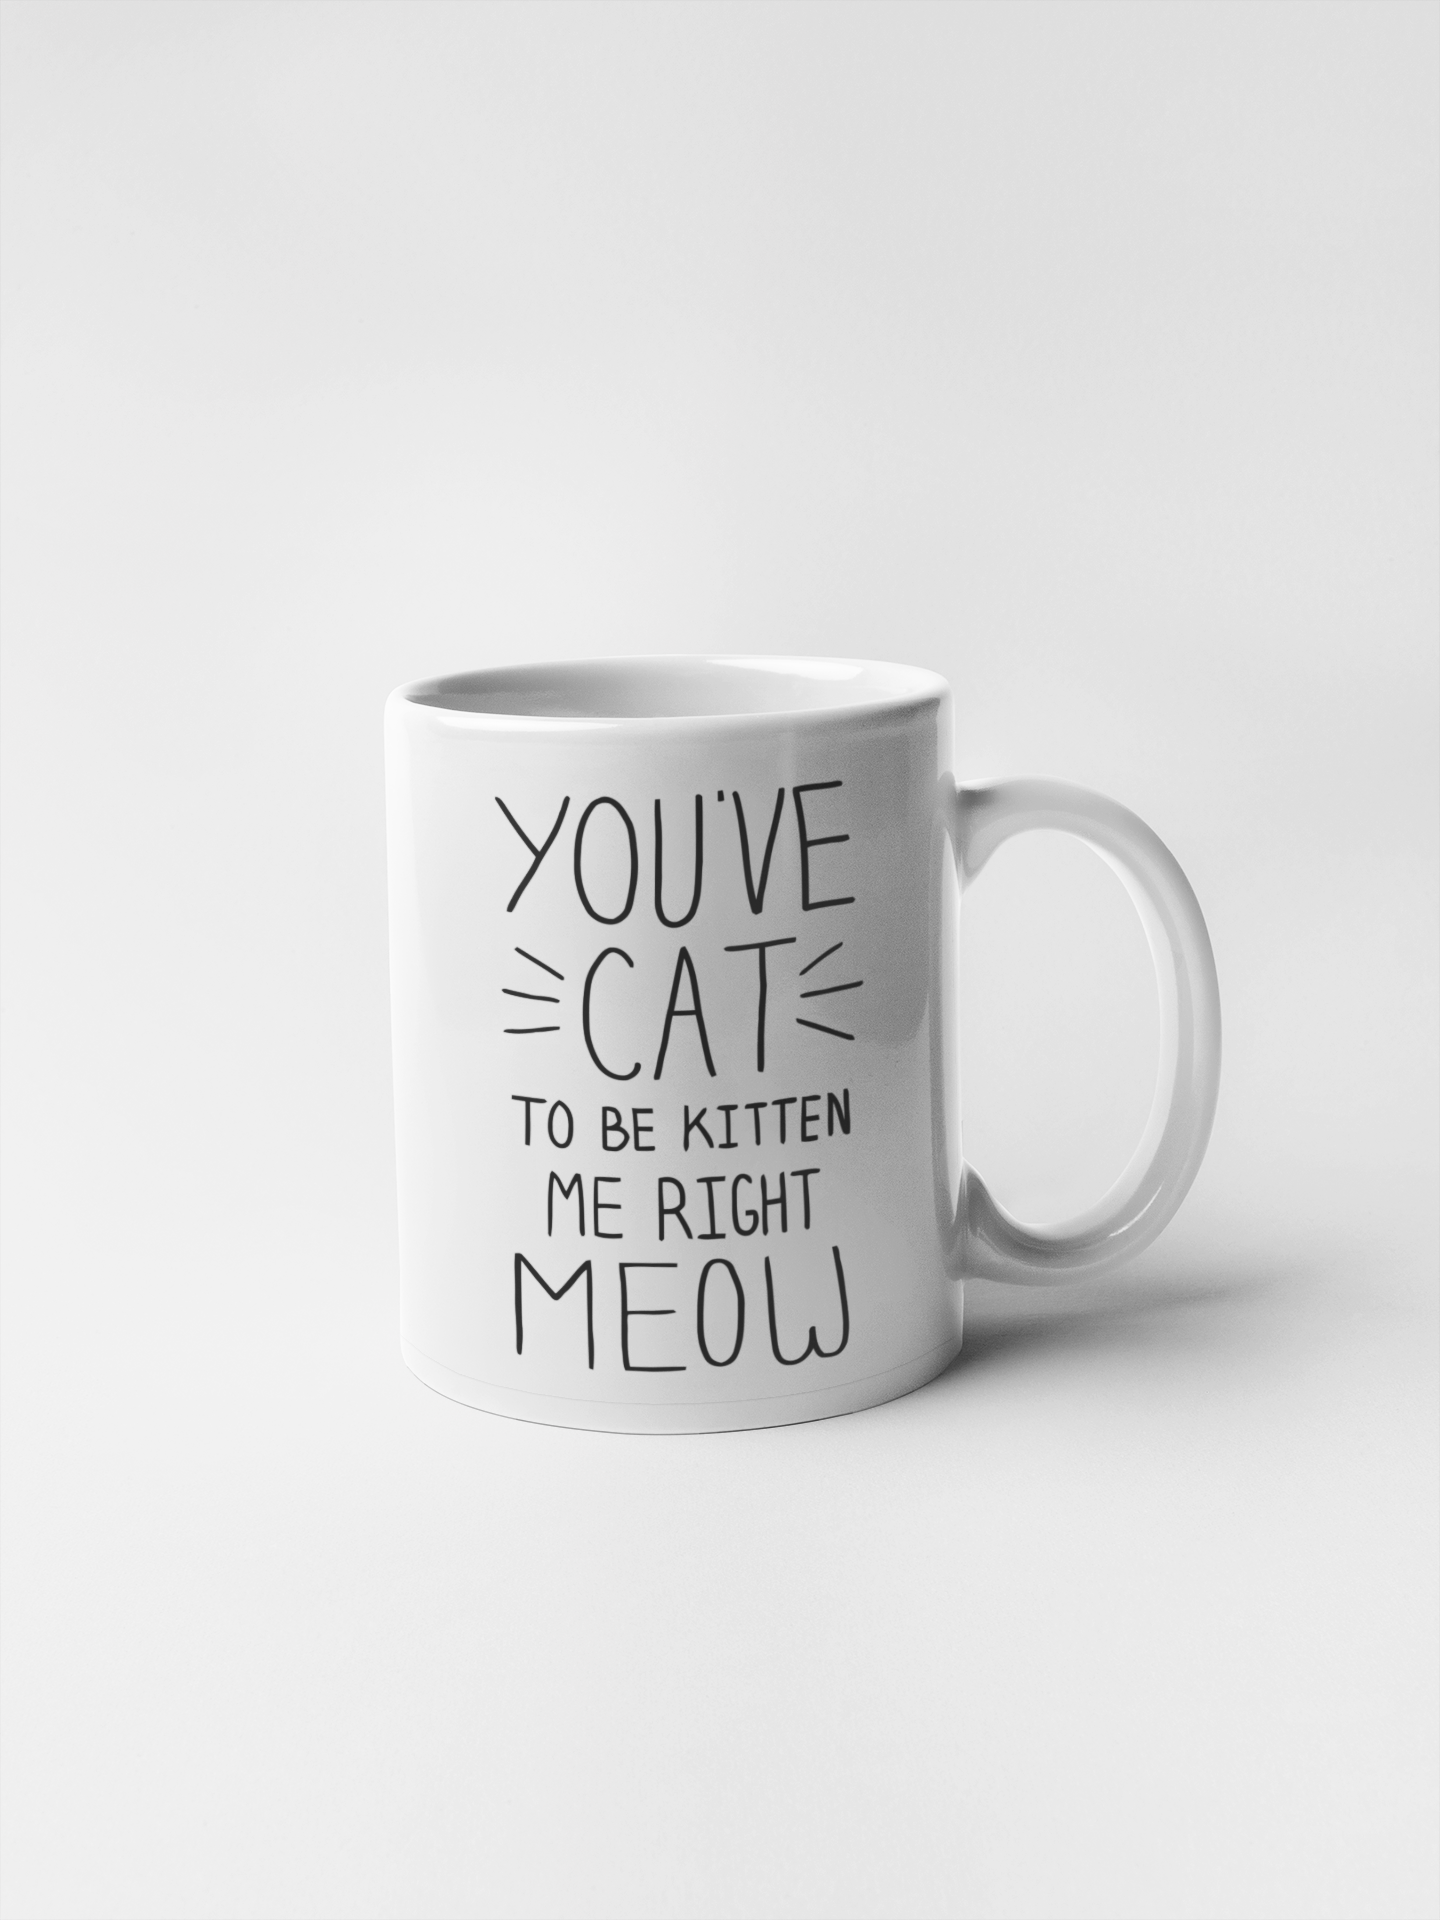 You have Cat To Be Kitten Me Right Meow Ceramic Coffee Mugs